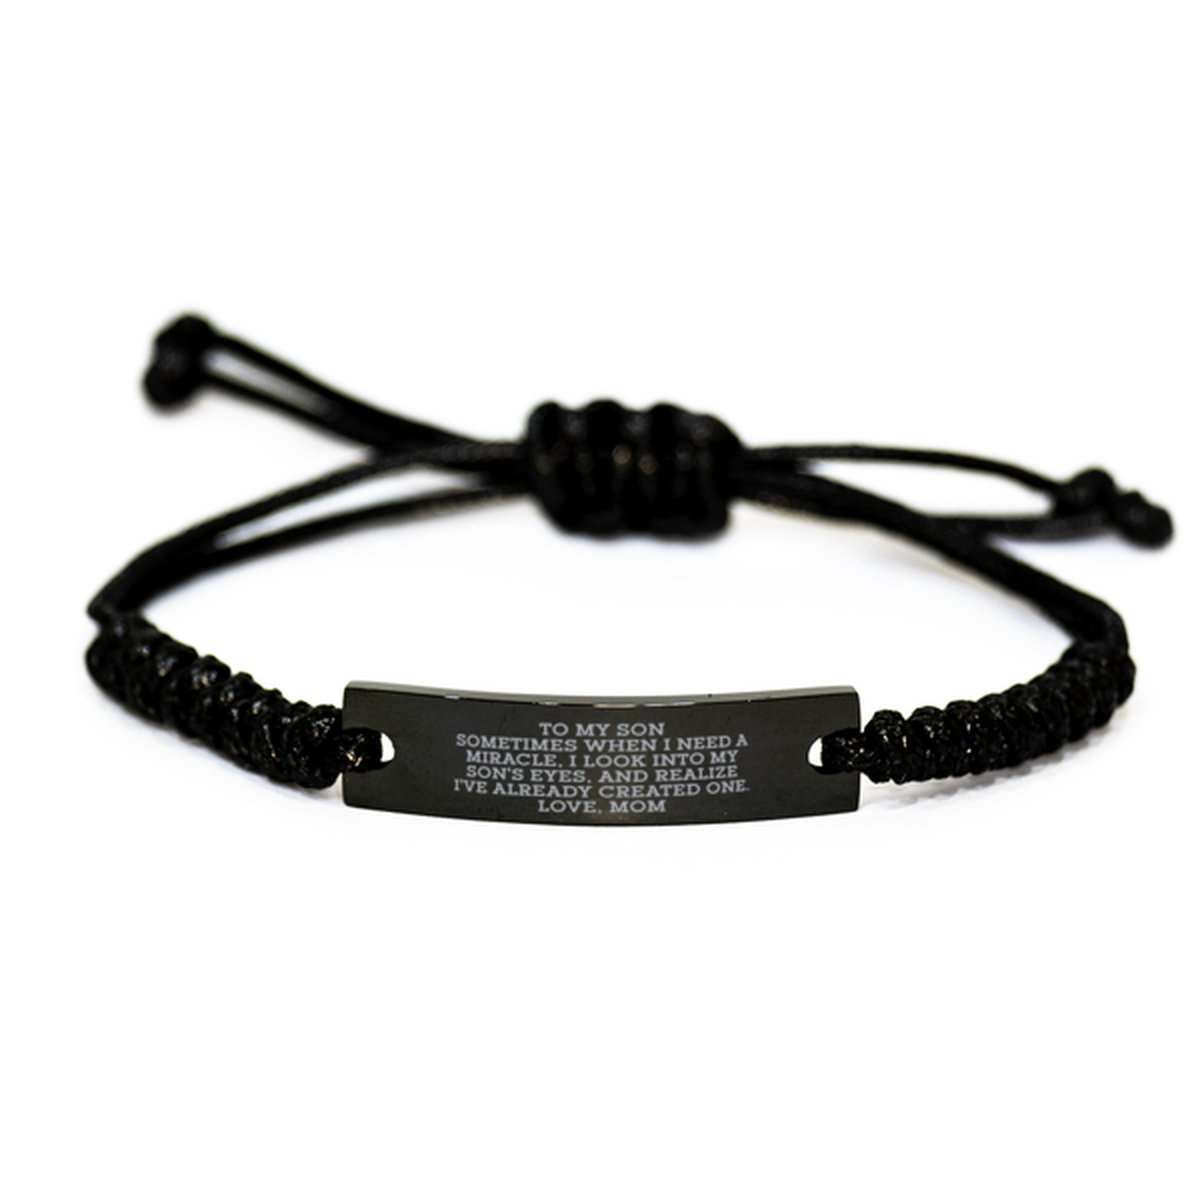 To My Son Rope Bracelet, Sometimes When I Need A Miracle, Graduation Day Gifts For Son From Mom, Birthday Gifts For Men